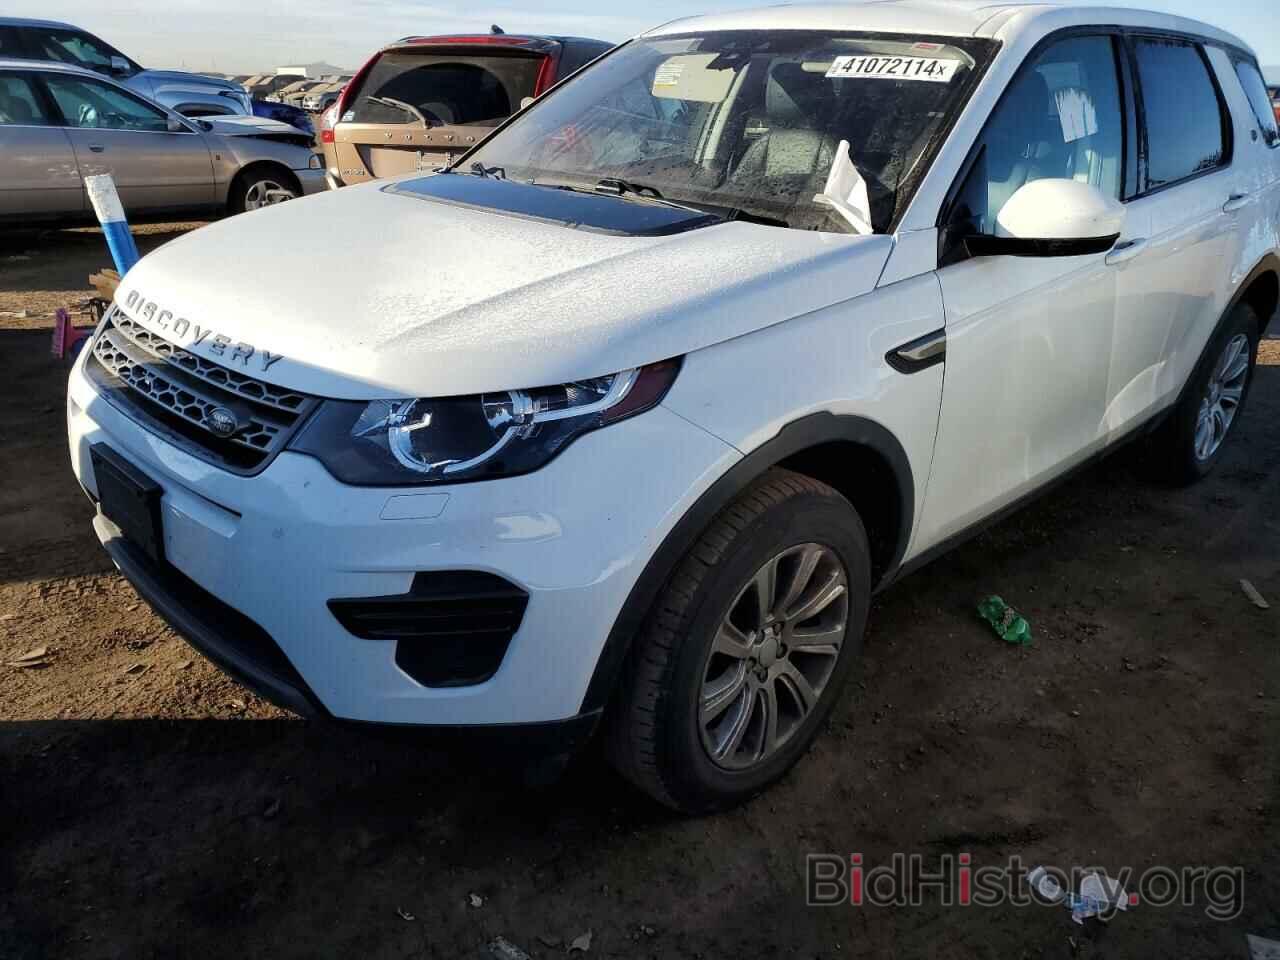 Фотография SALCP2RX8JH750973 - LAND ROVER DISCOVERY 2018